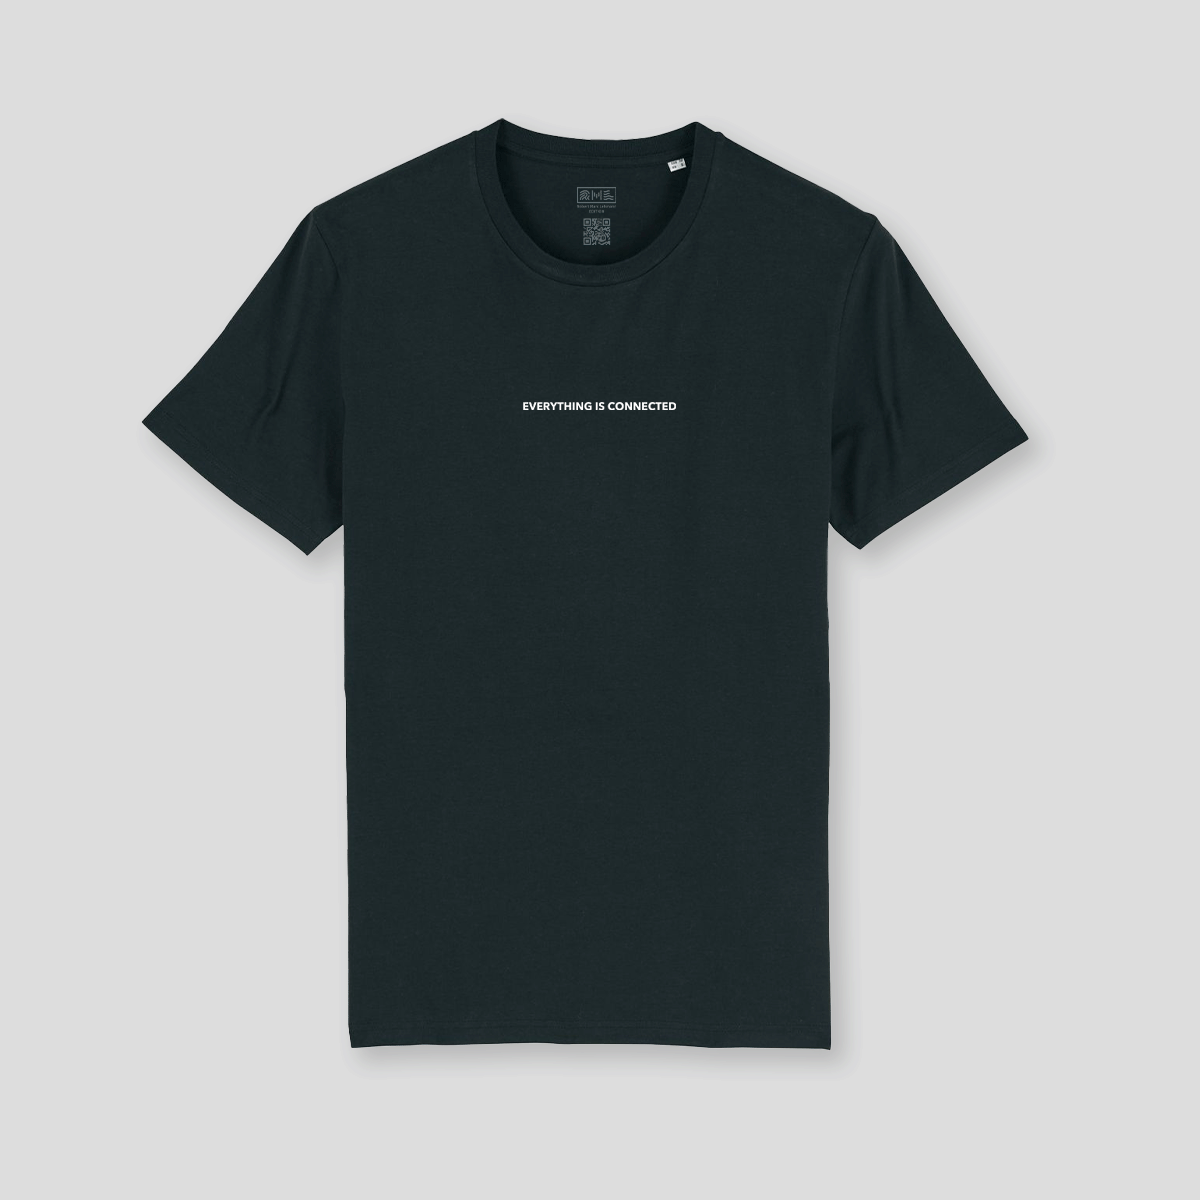 T-Shirt "Everything is connected"